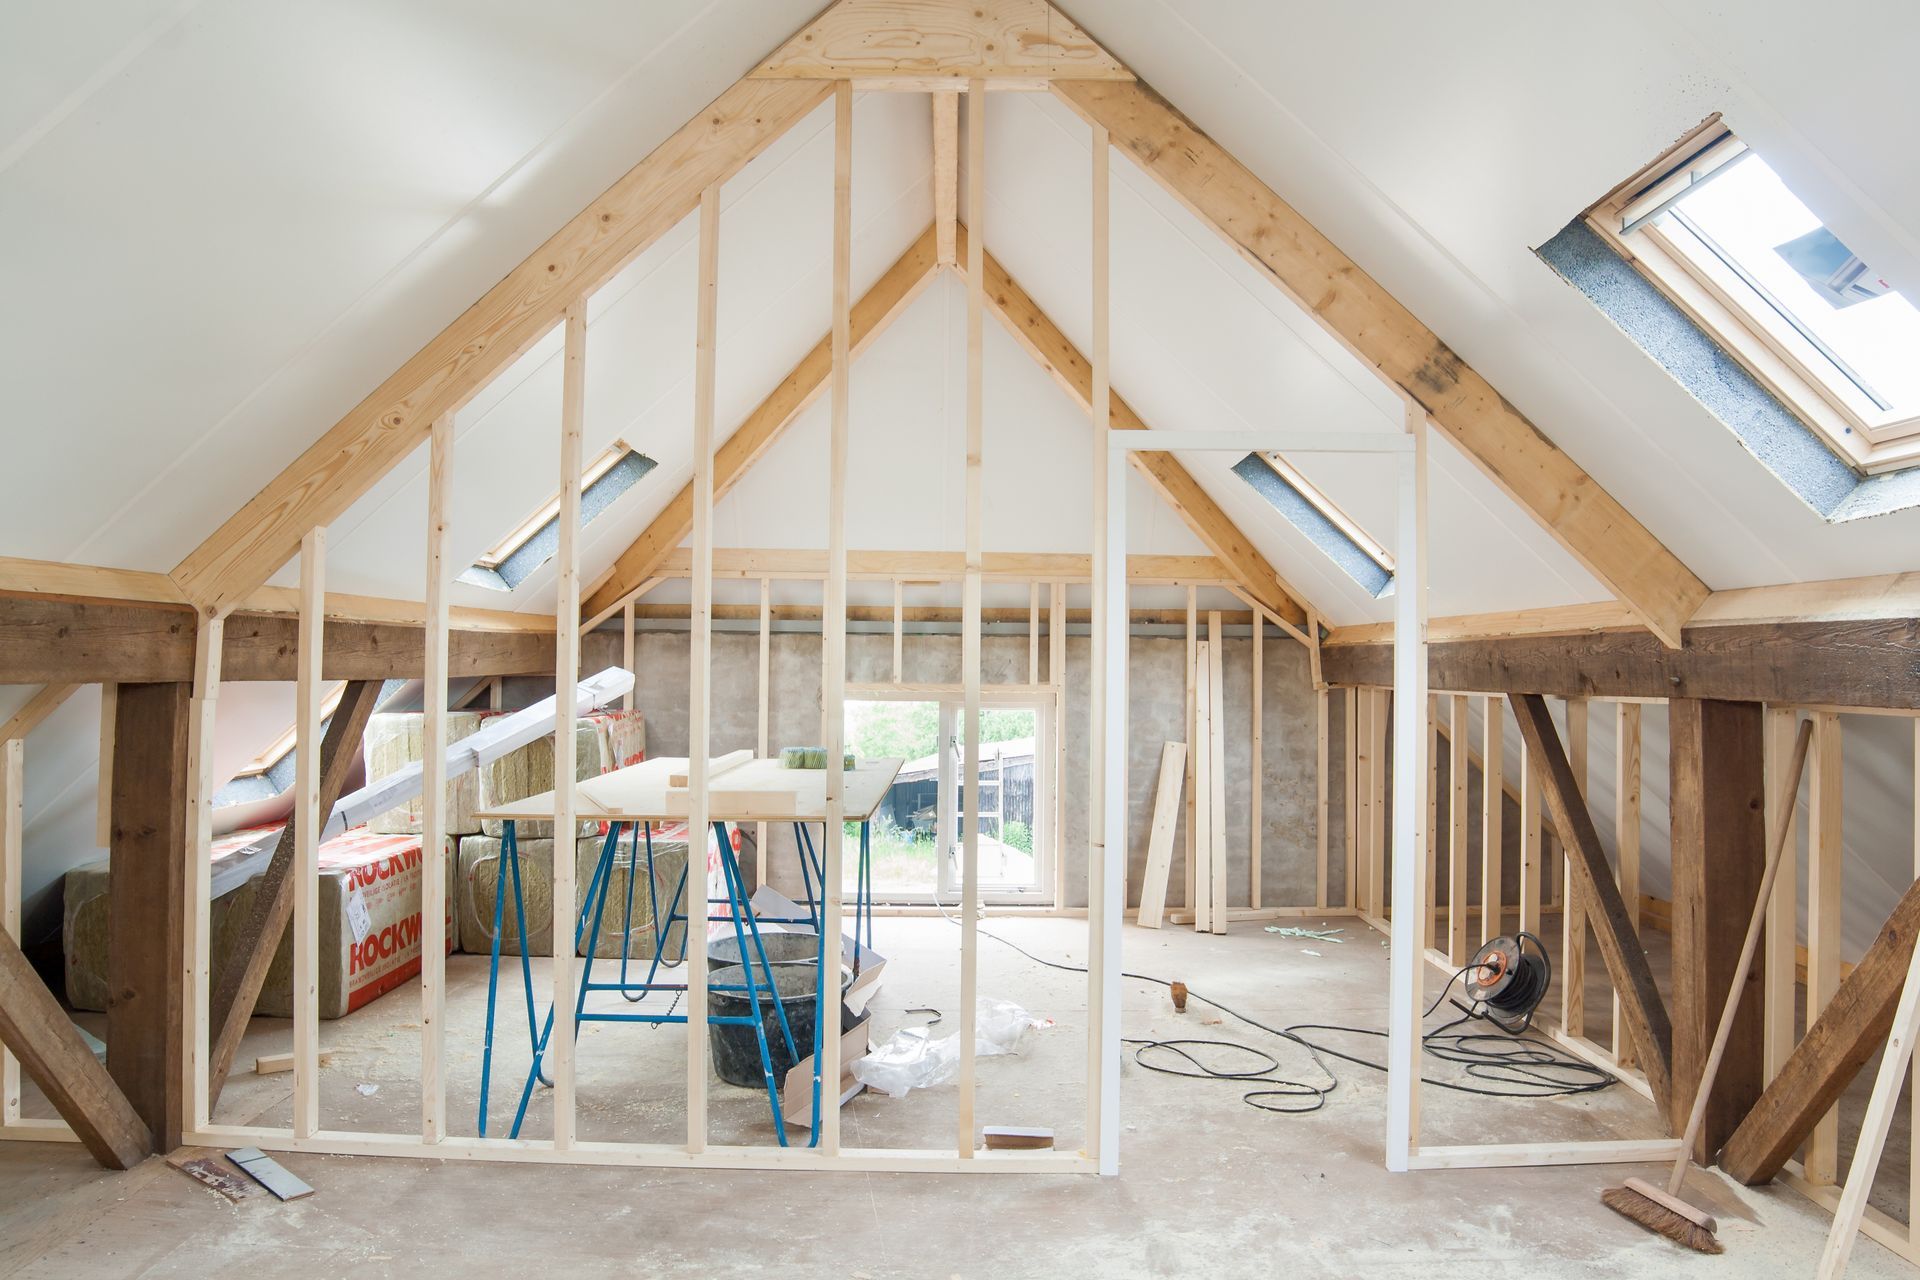 An image of a wooden frame under construction during a home renovation, showcasing the skeletal structure of the house with exposed beams and support framework.